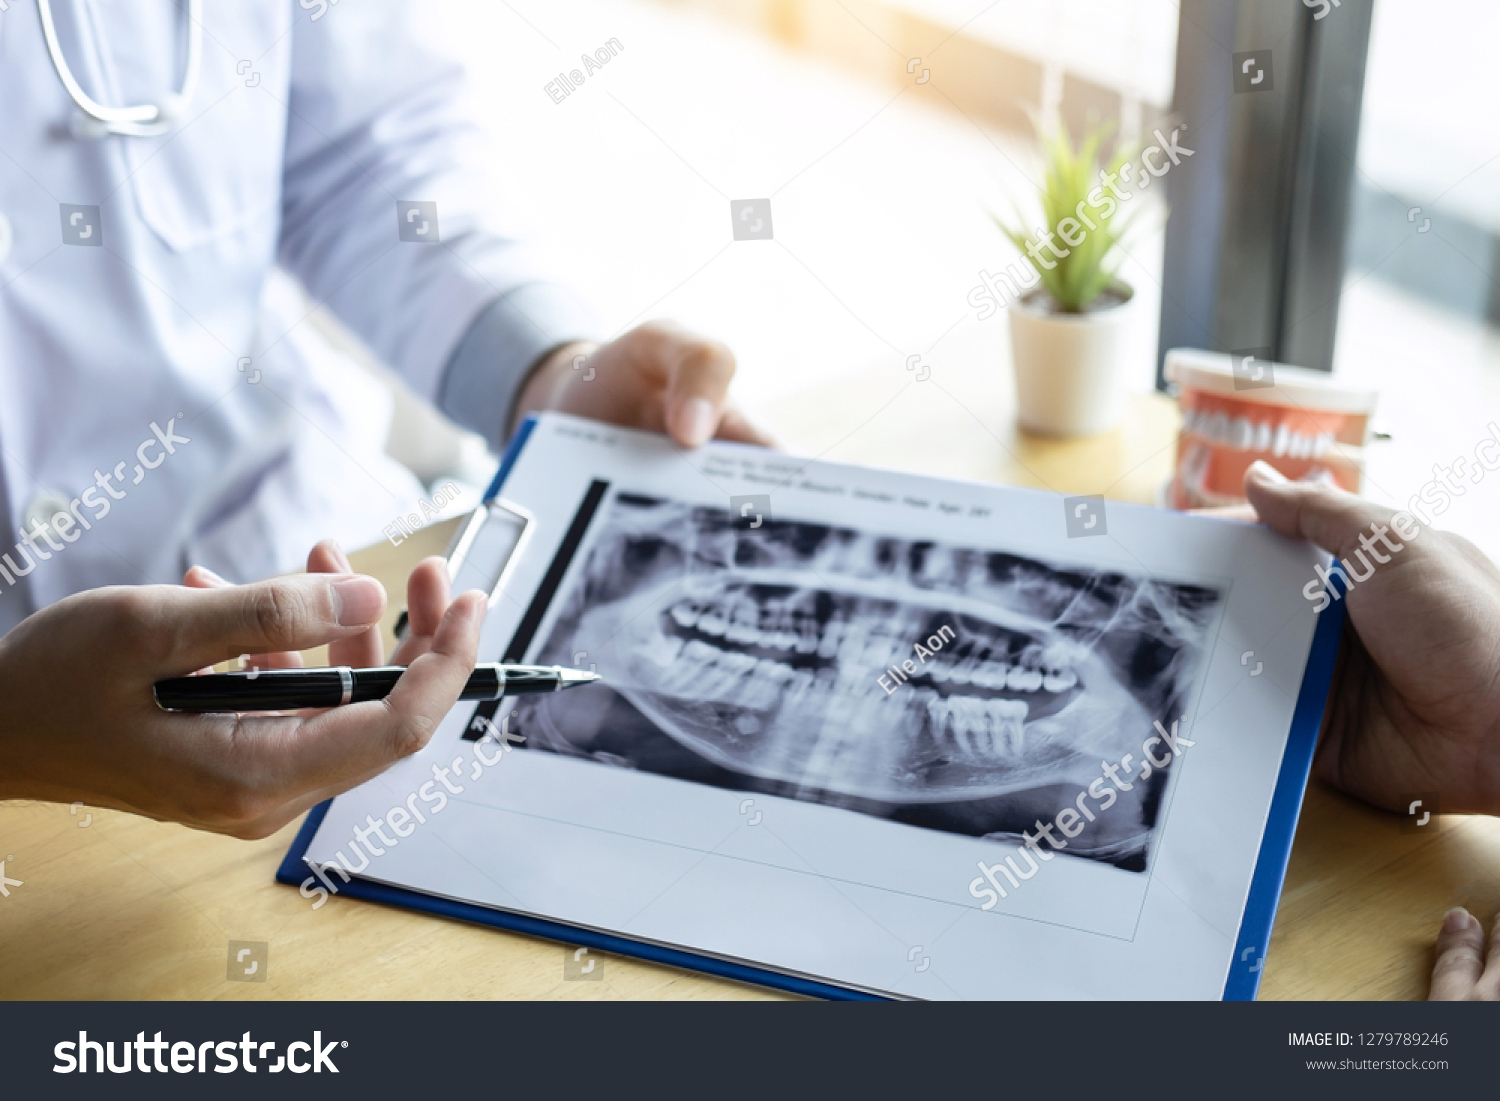 Image of doctor or dentist presenting with tooth x-ray film recommend patient in the treatment of dental and dentistry, working at workplace. #1279789246